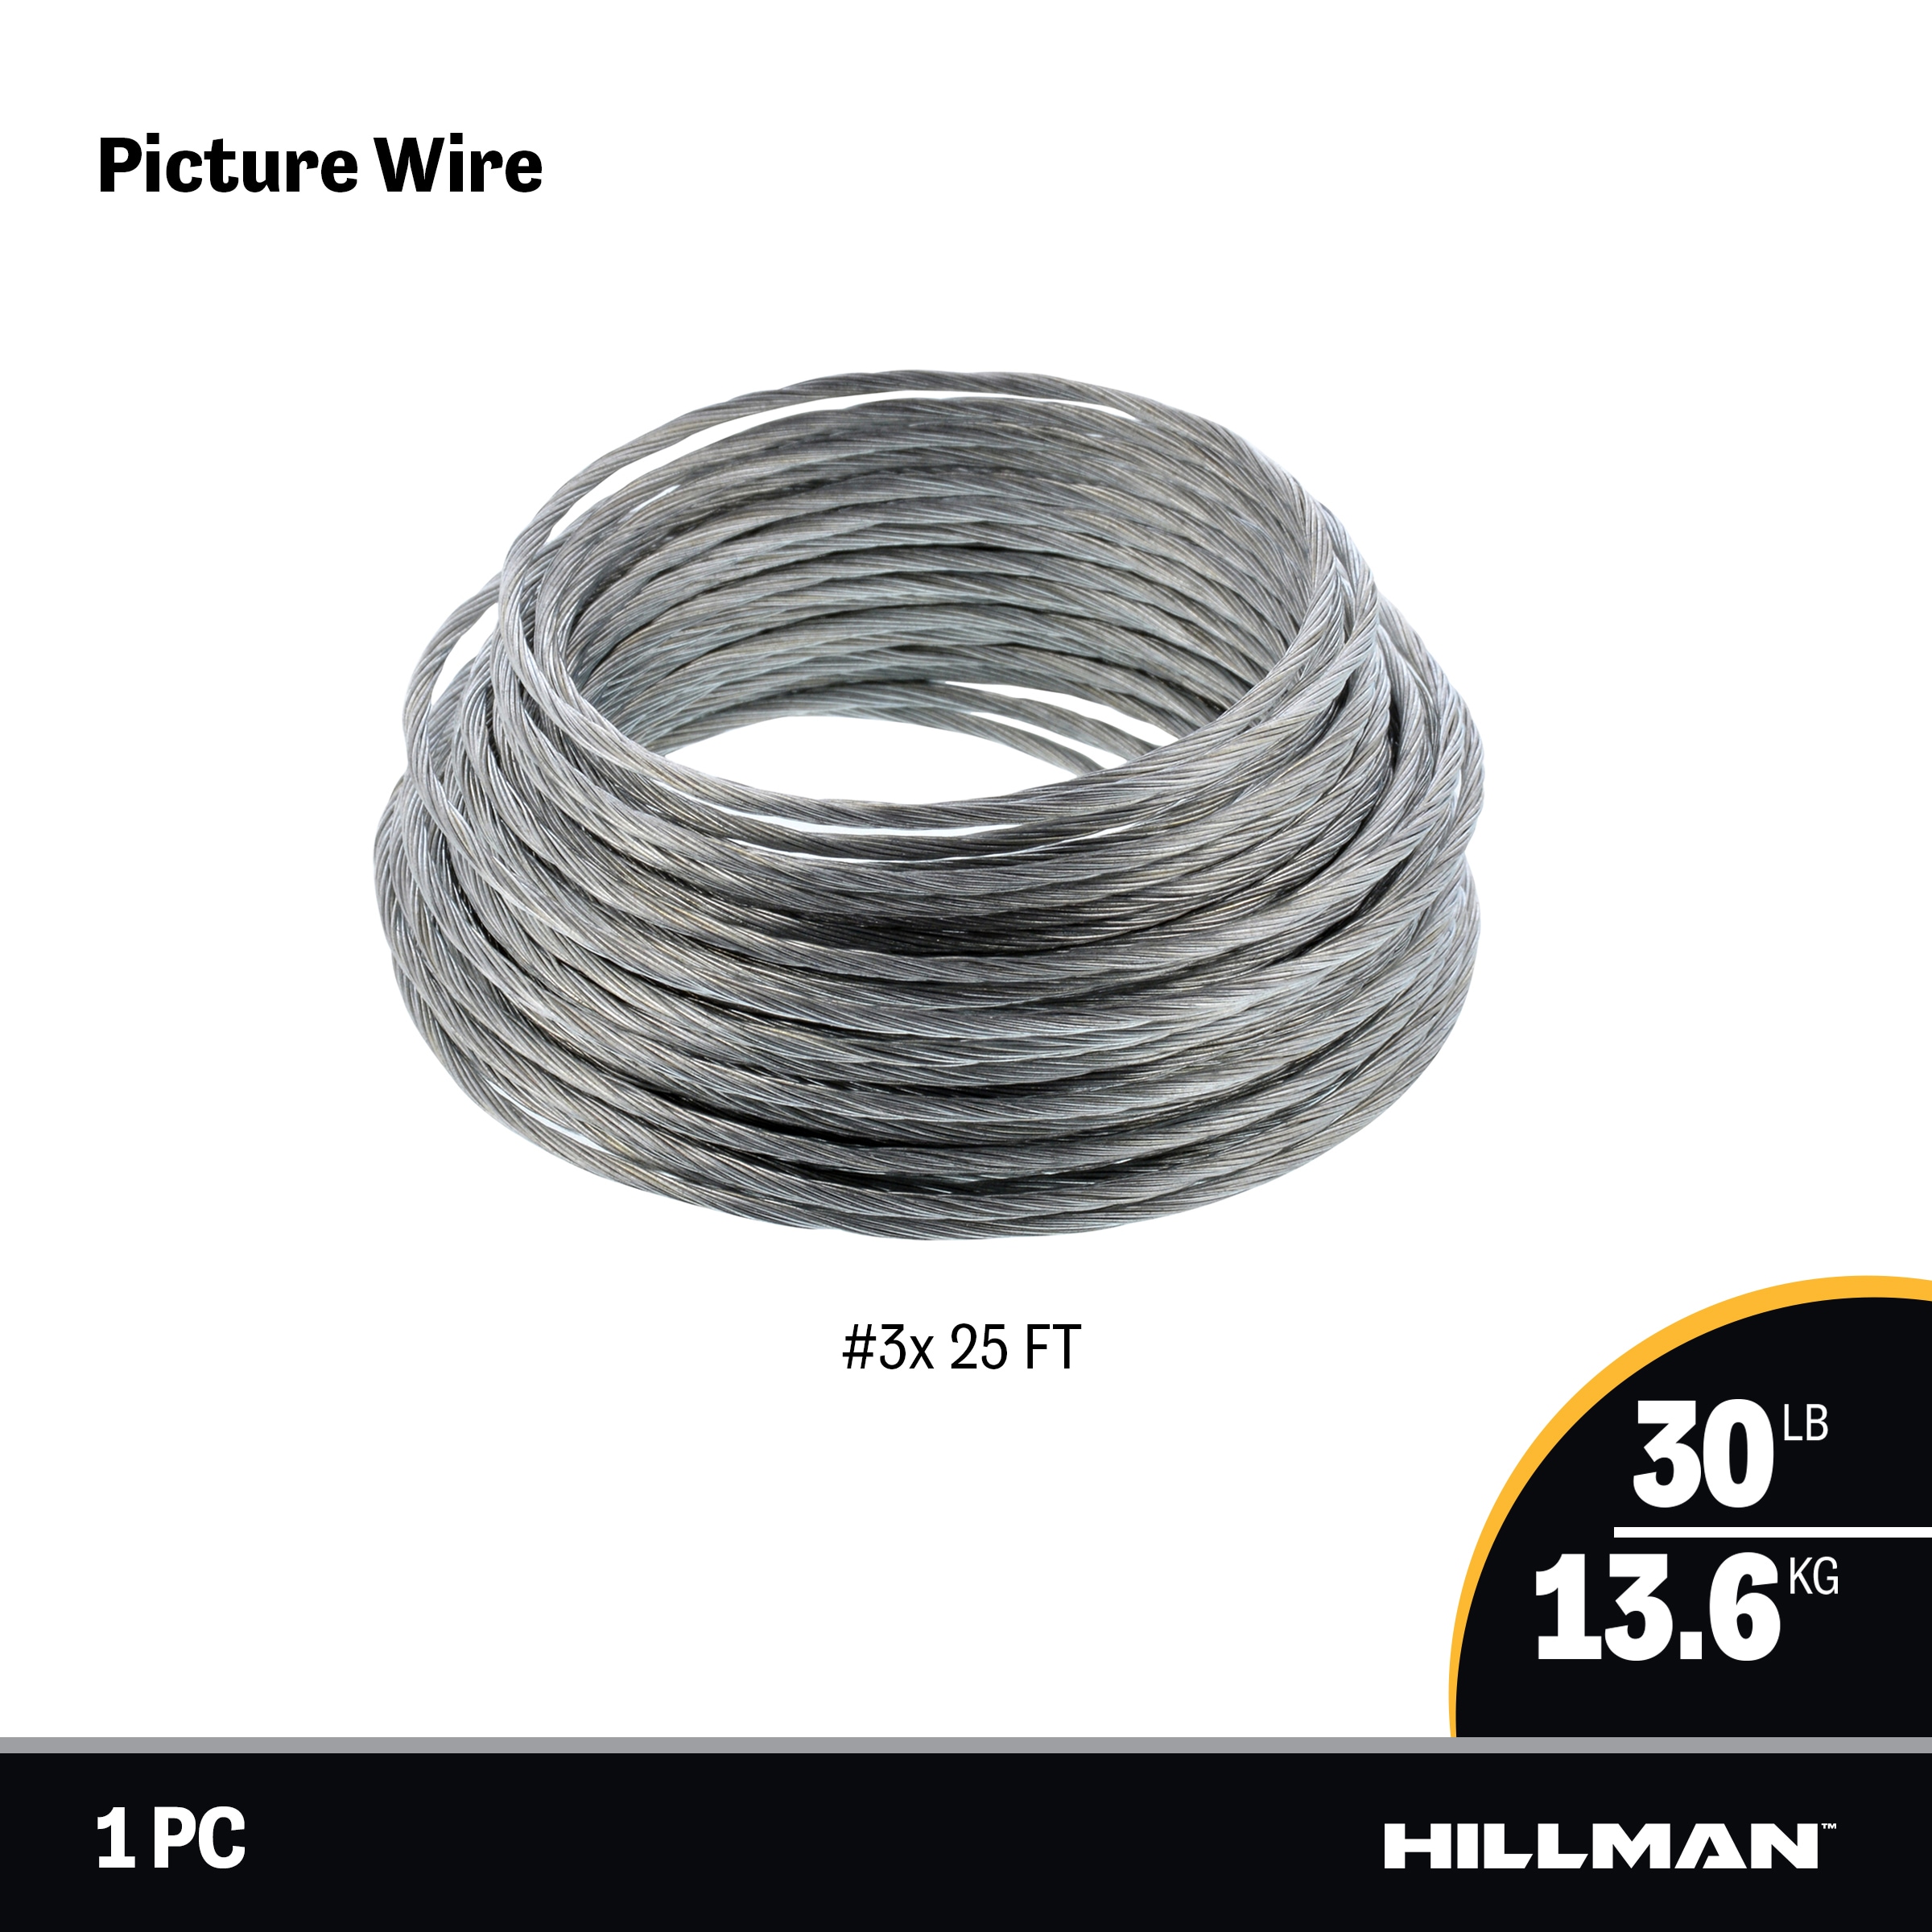 Hillman #3x25-ft Picture Wire